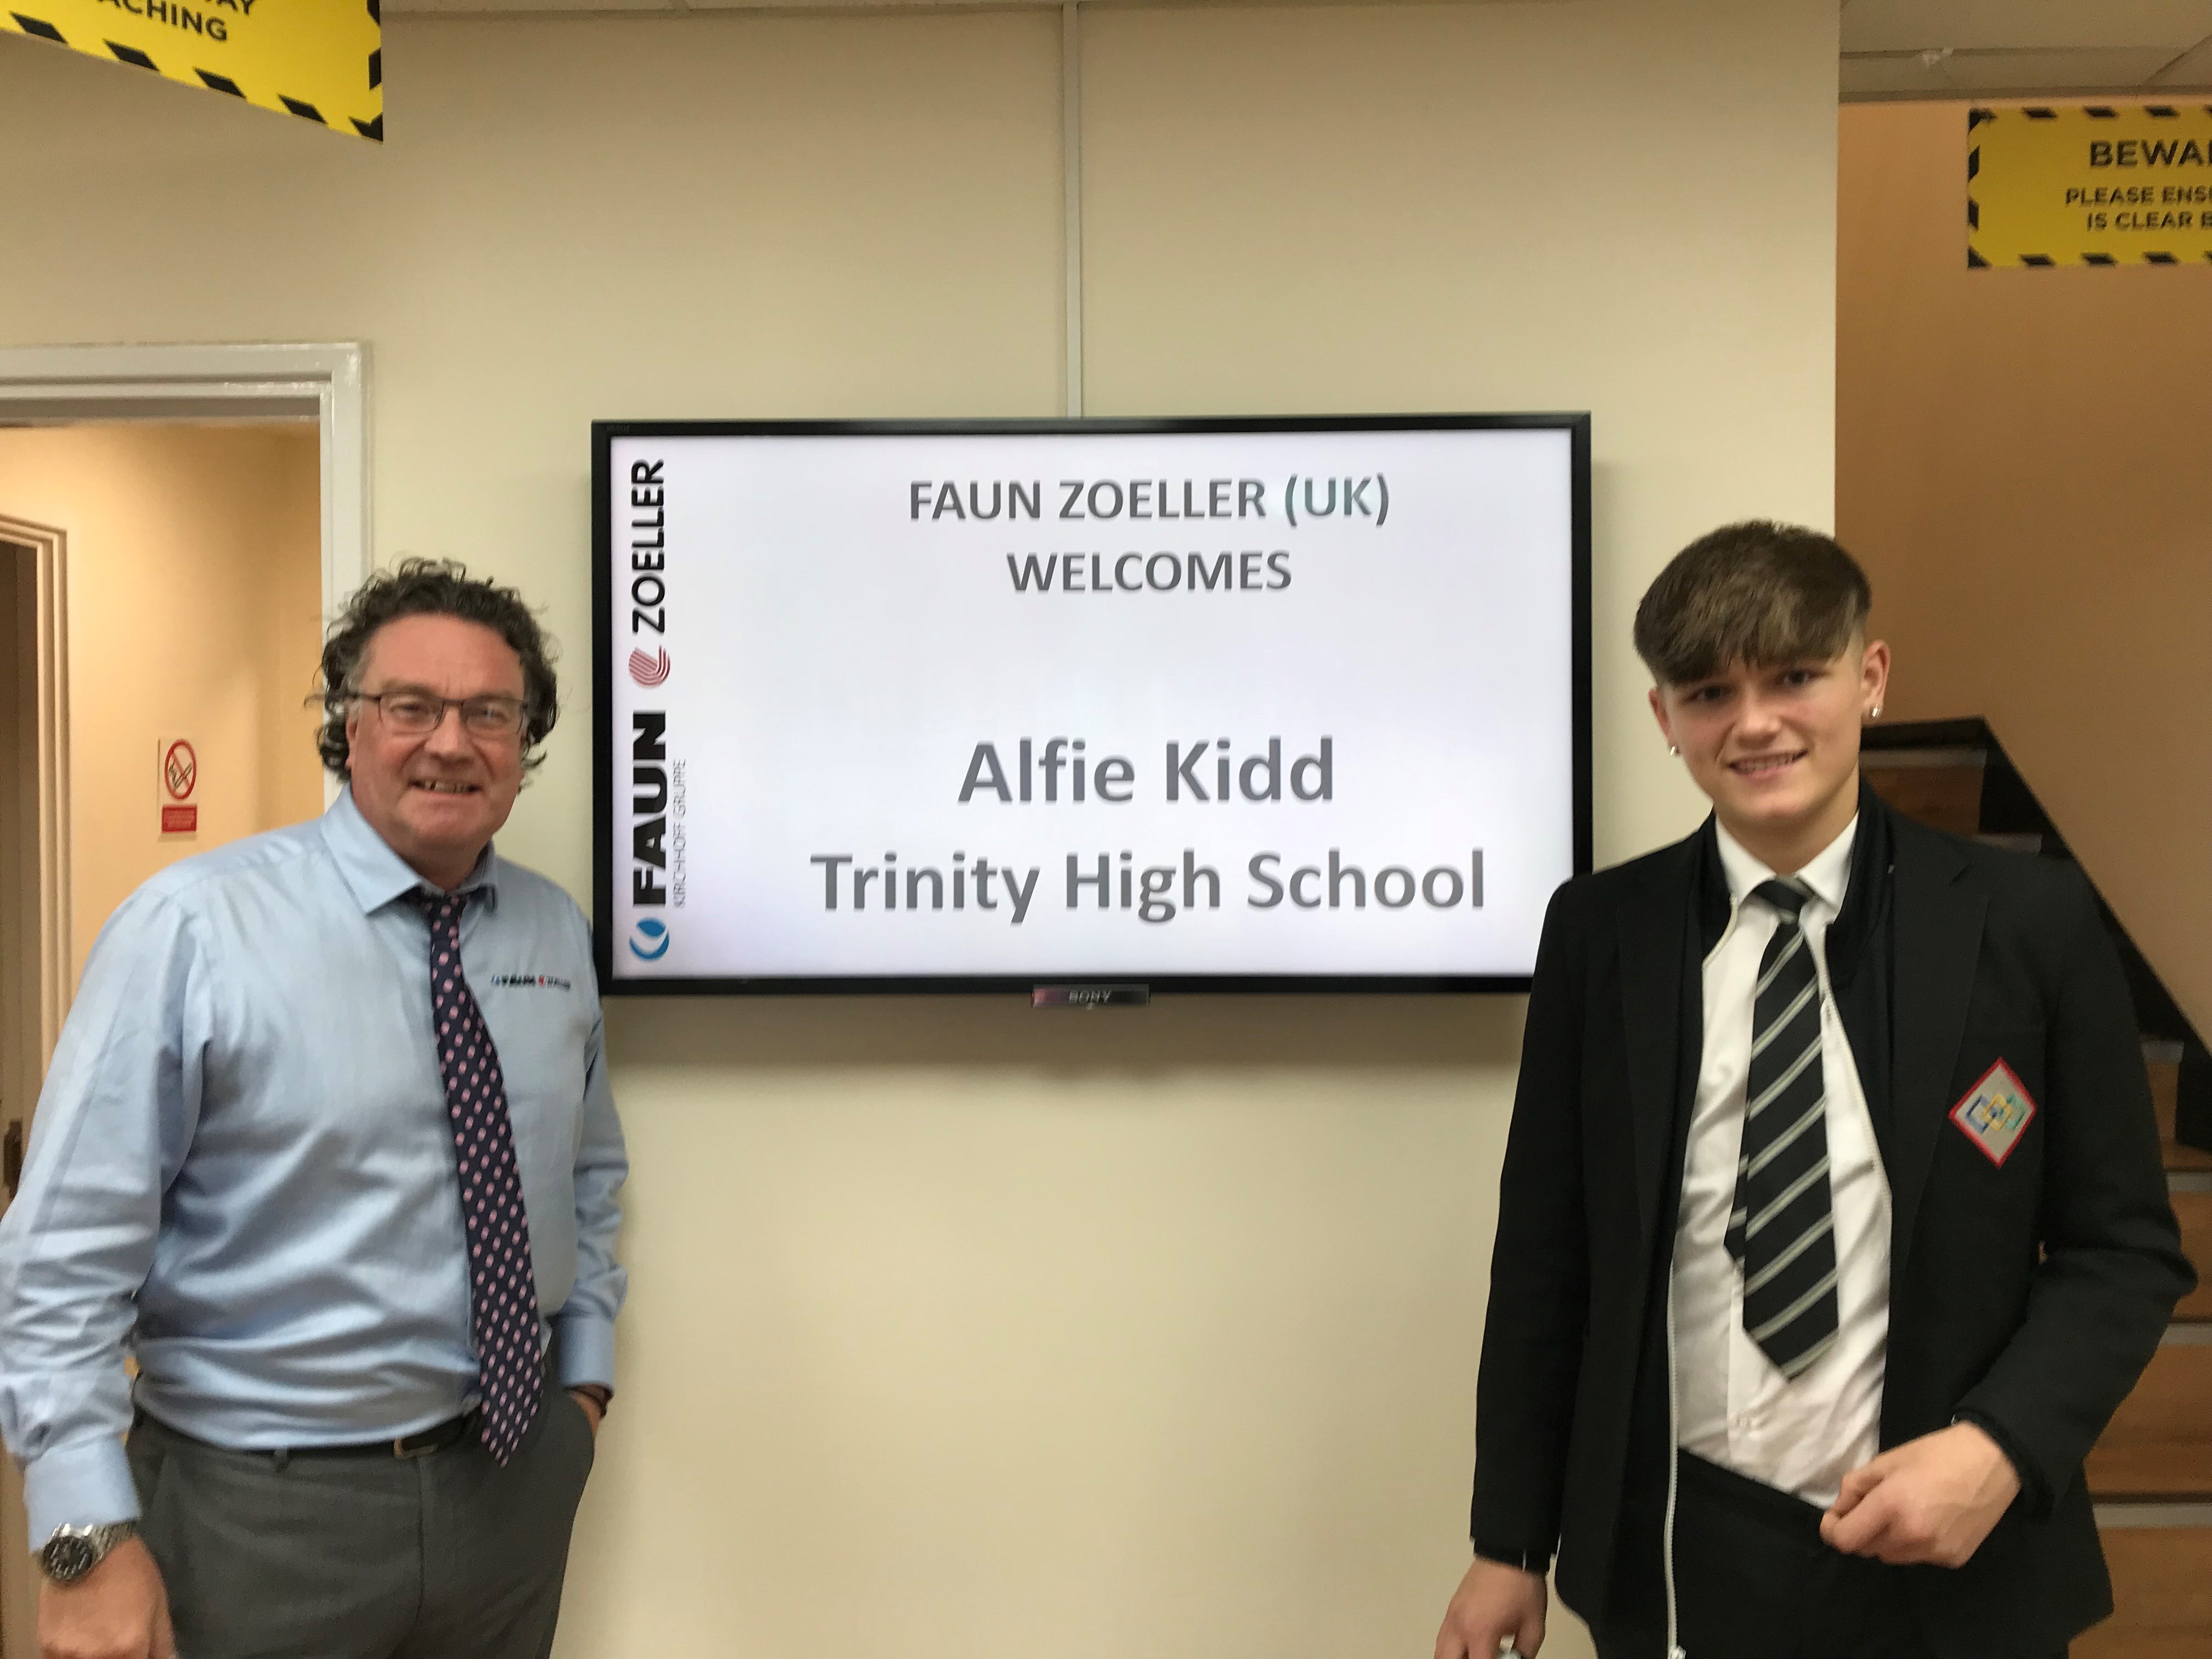 Image shows Alfie Kidd and Simon Hyde standing either side of a TV screen which shows a welcome message for Alfie